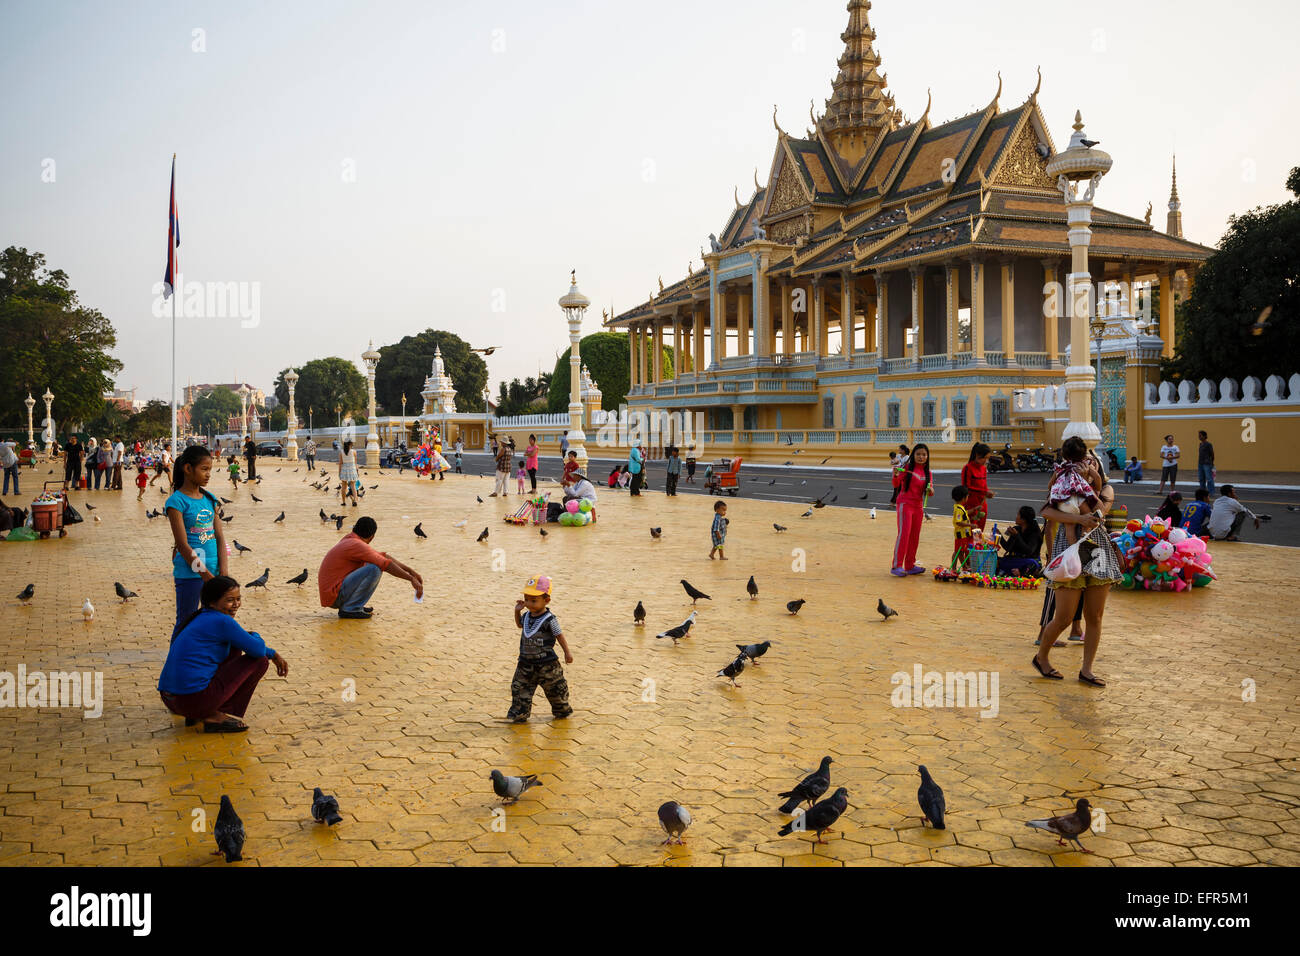 People at a square in front of the Royal Palace, Phnom Penh, Cambodia. Stock Photo